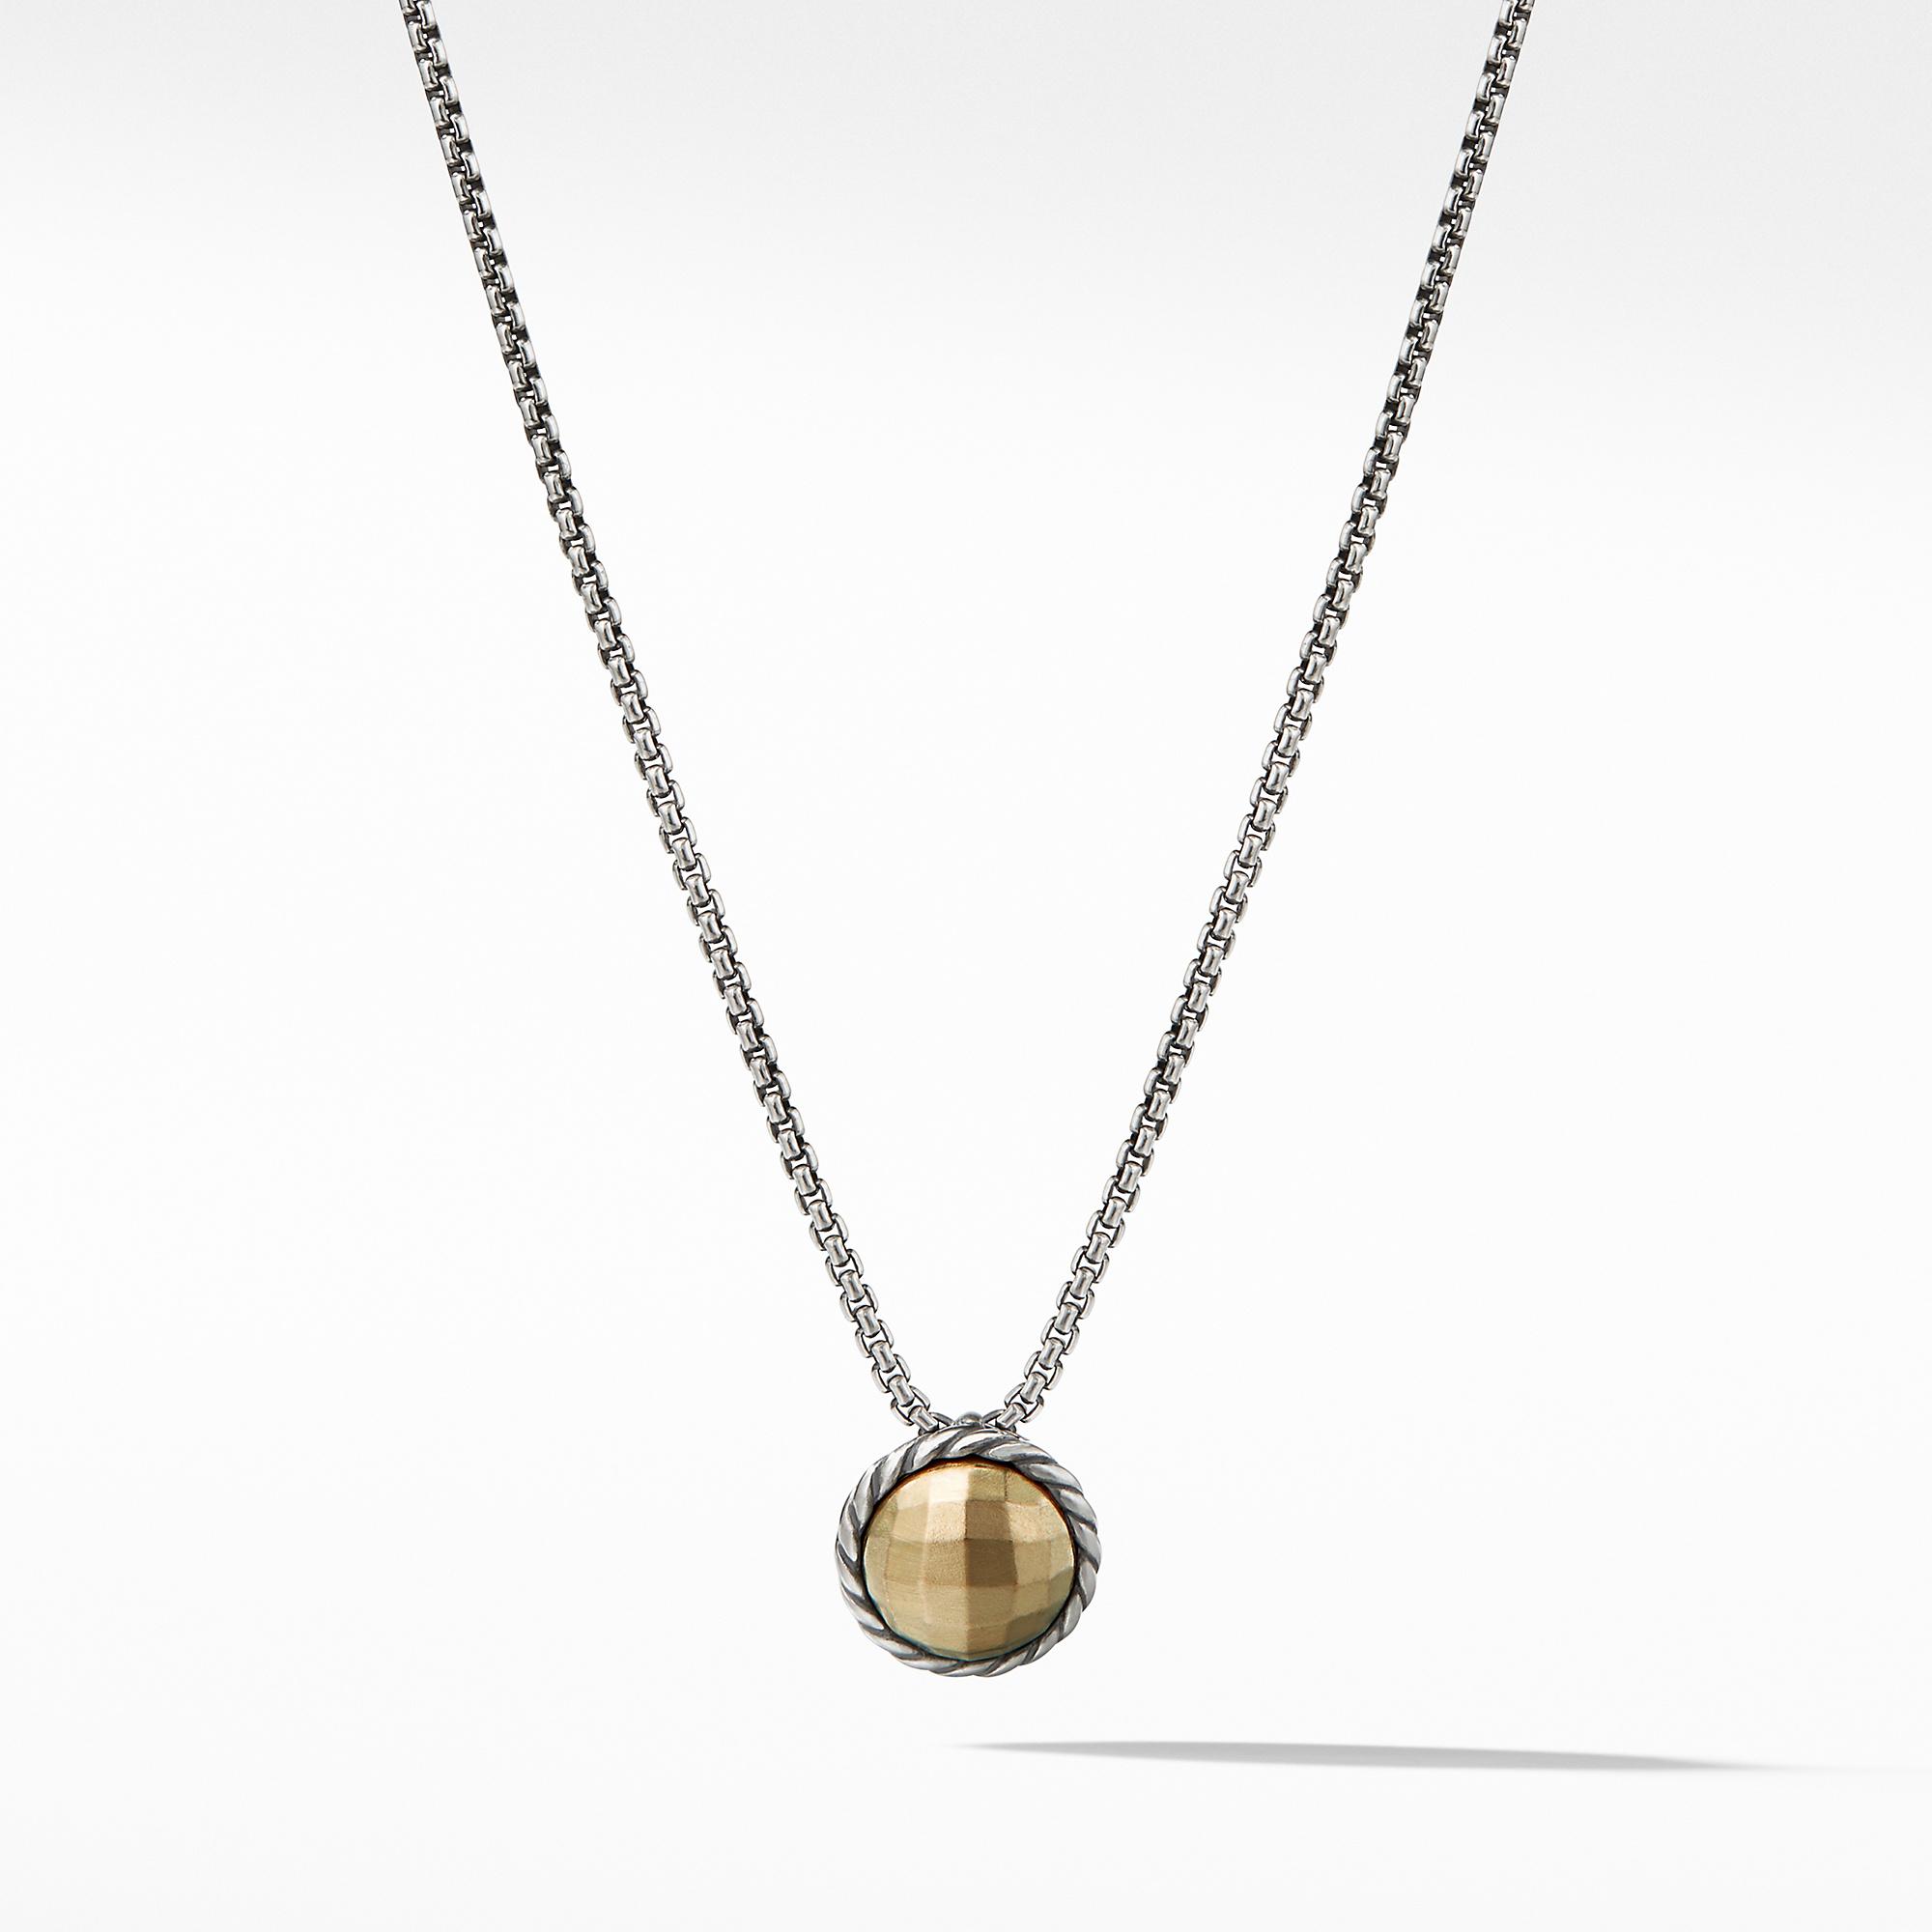 David Yurman Necklace with Gold Dome and 18K Gold